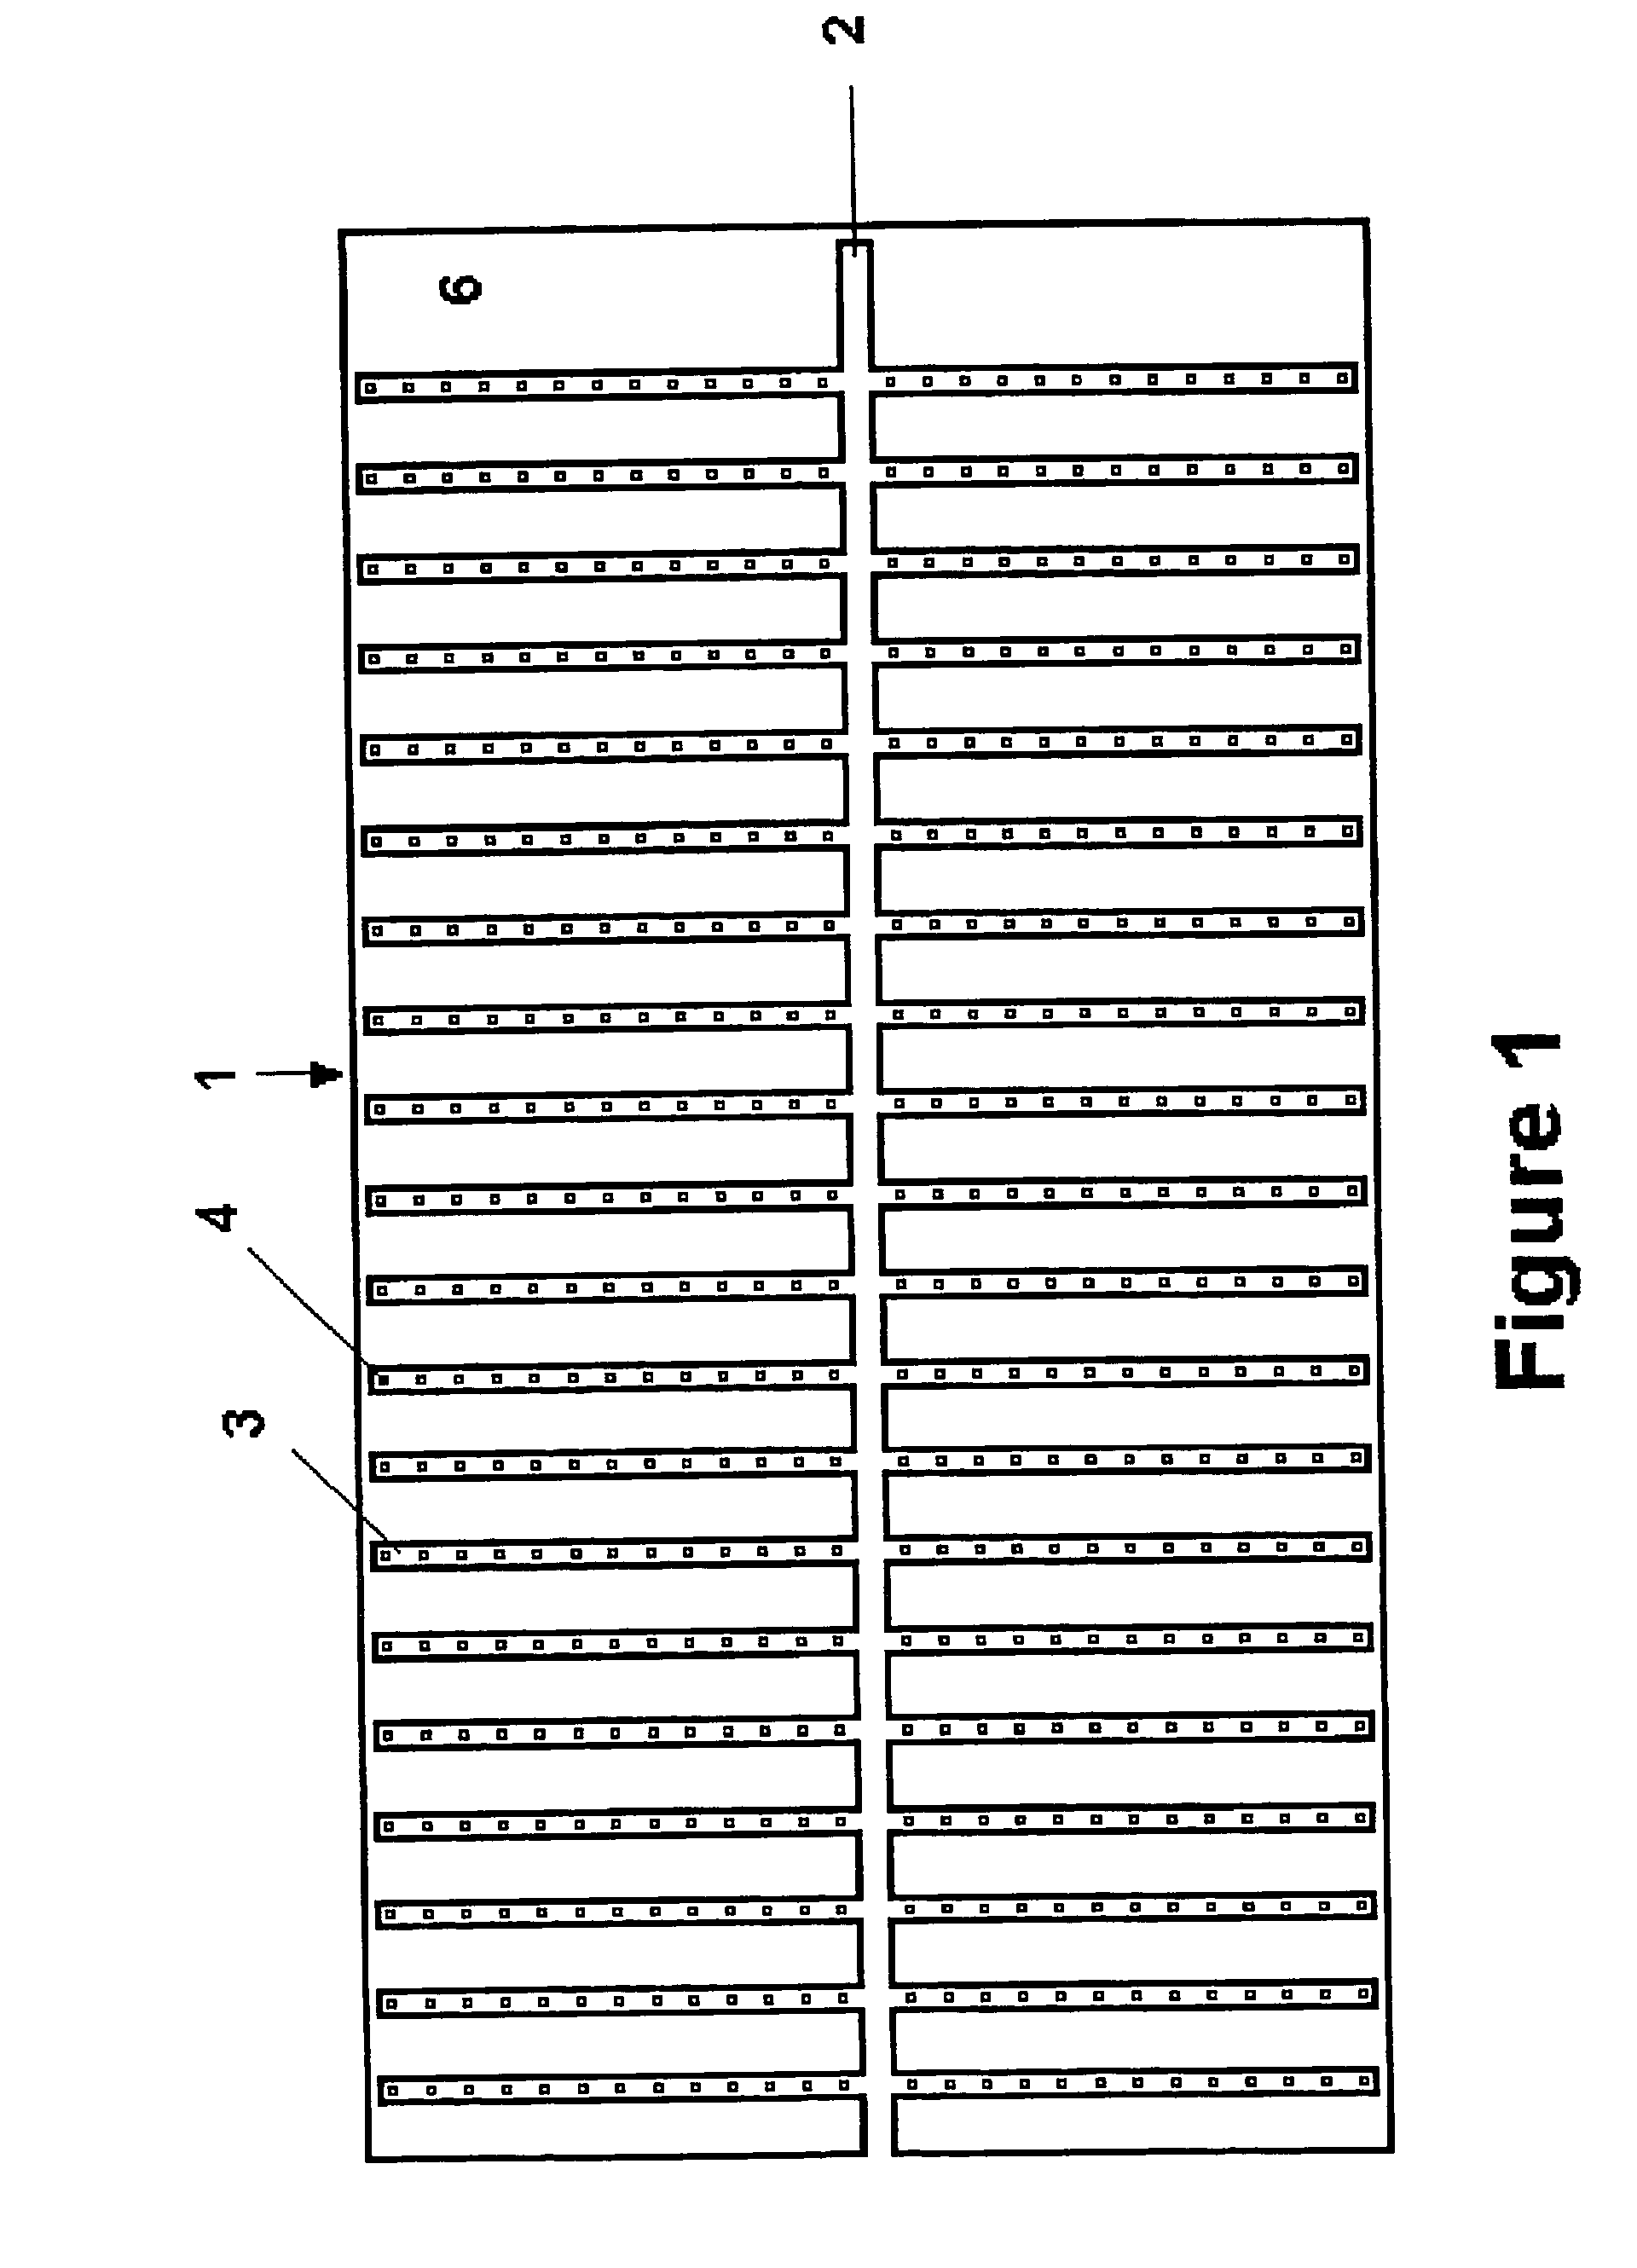 Pore cathode for the mass production of photovoltaic devices having increased conversion efficiency